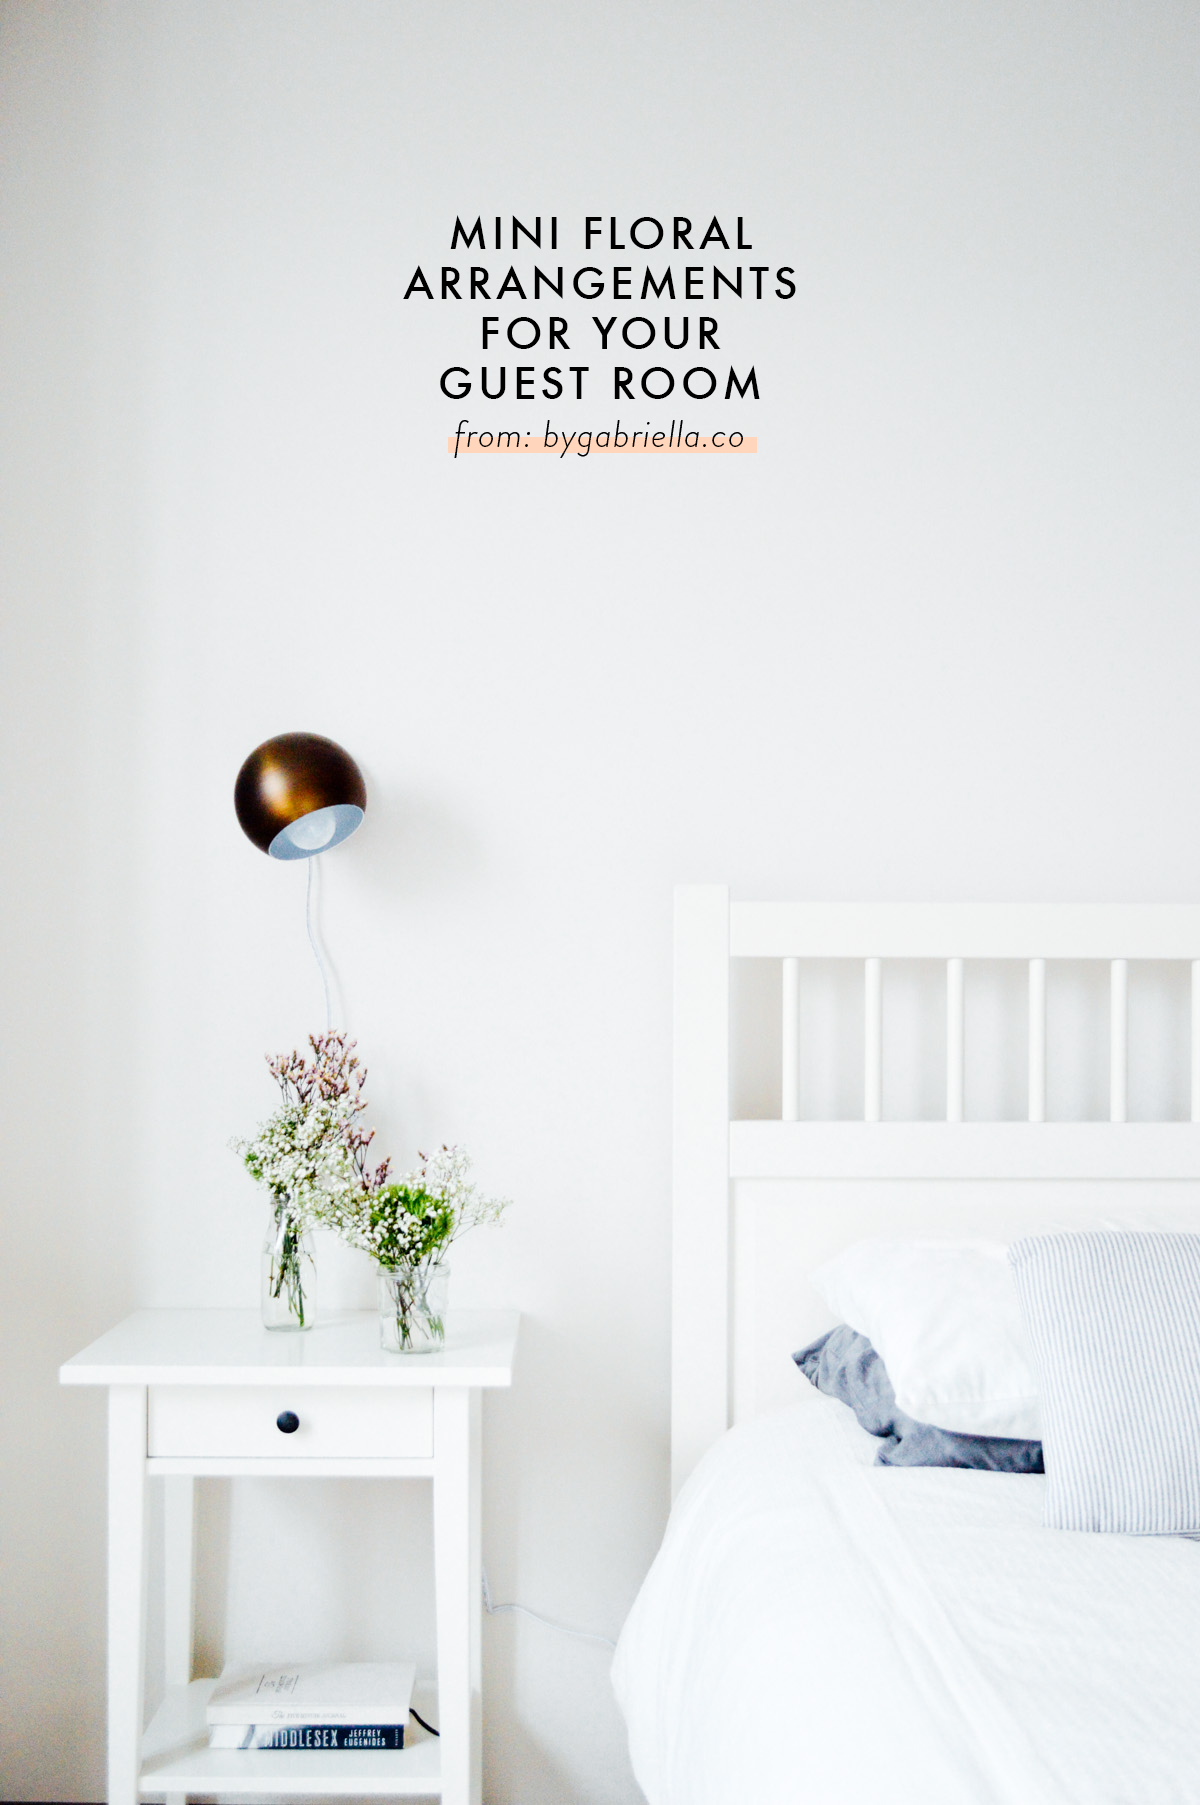 Inviting guests to visit soon? Here are guest room flowers for under $20! | bygabriella.co